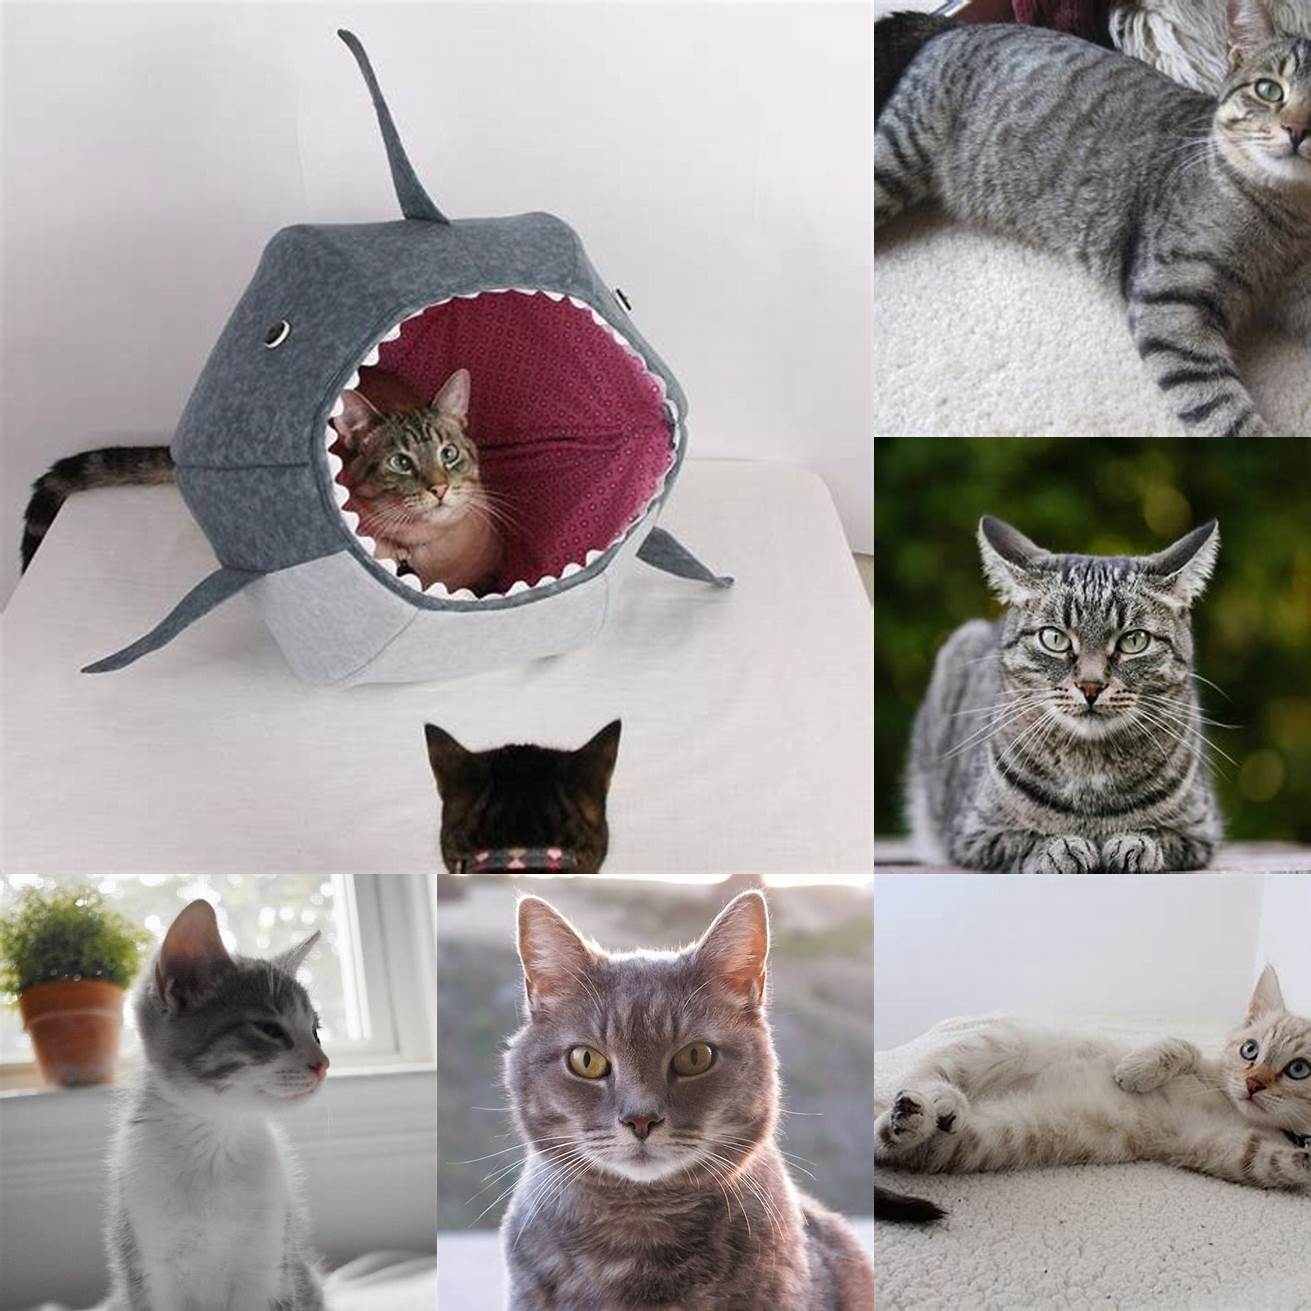 A gray tabby cat poking its head out of a shark bed